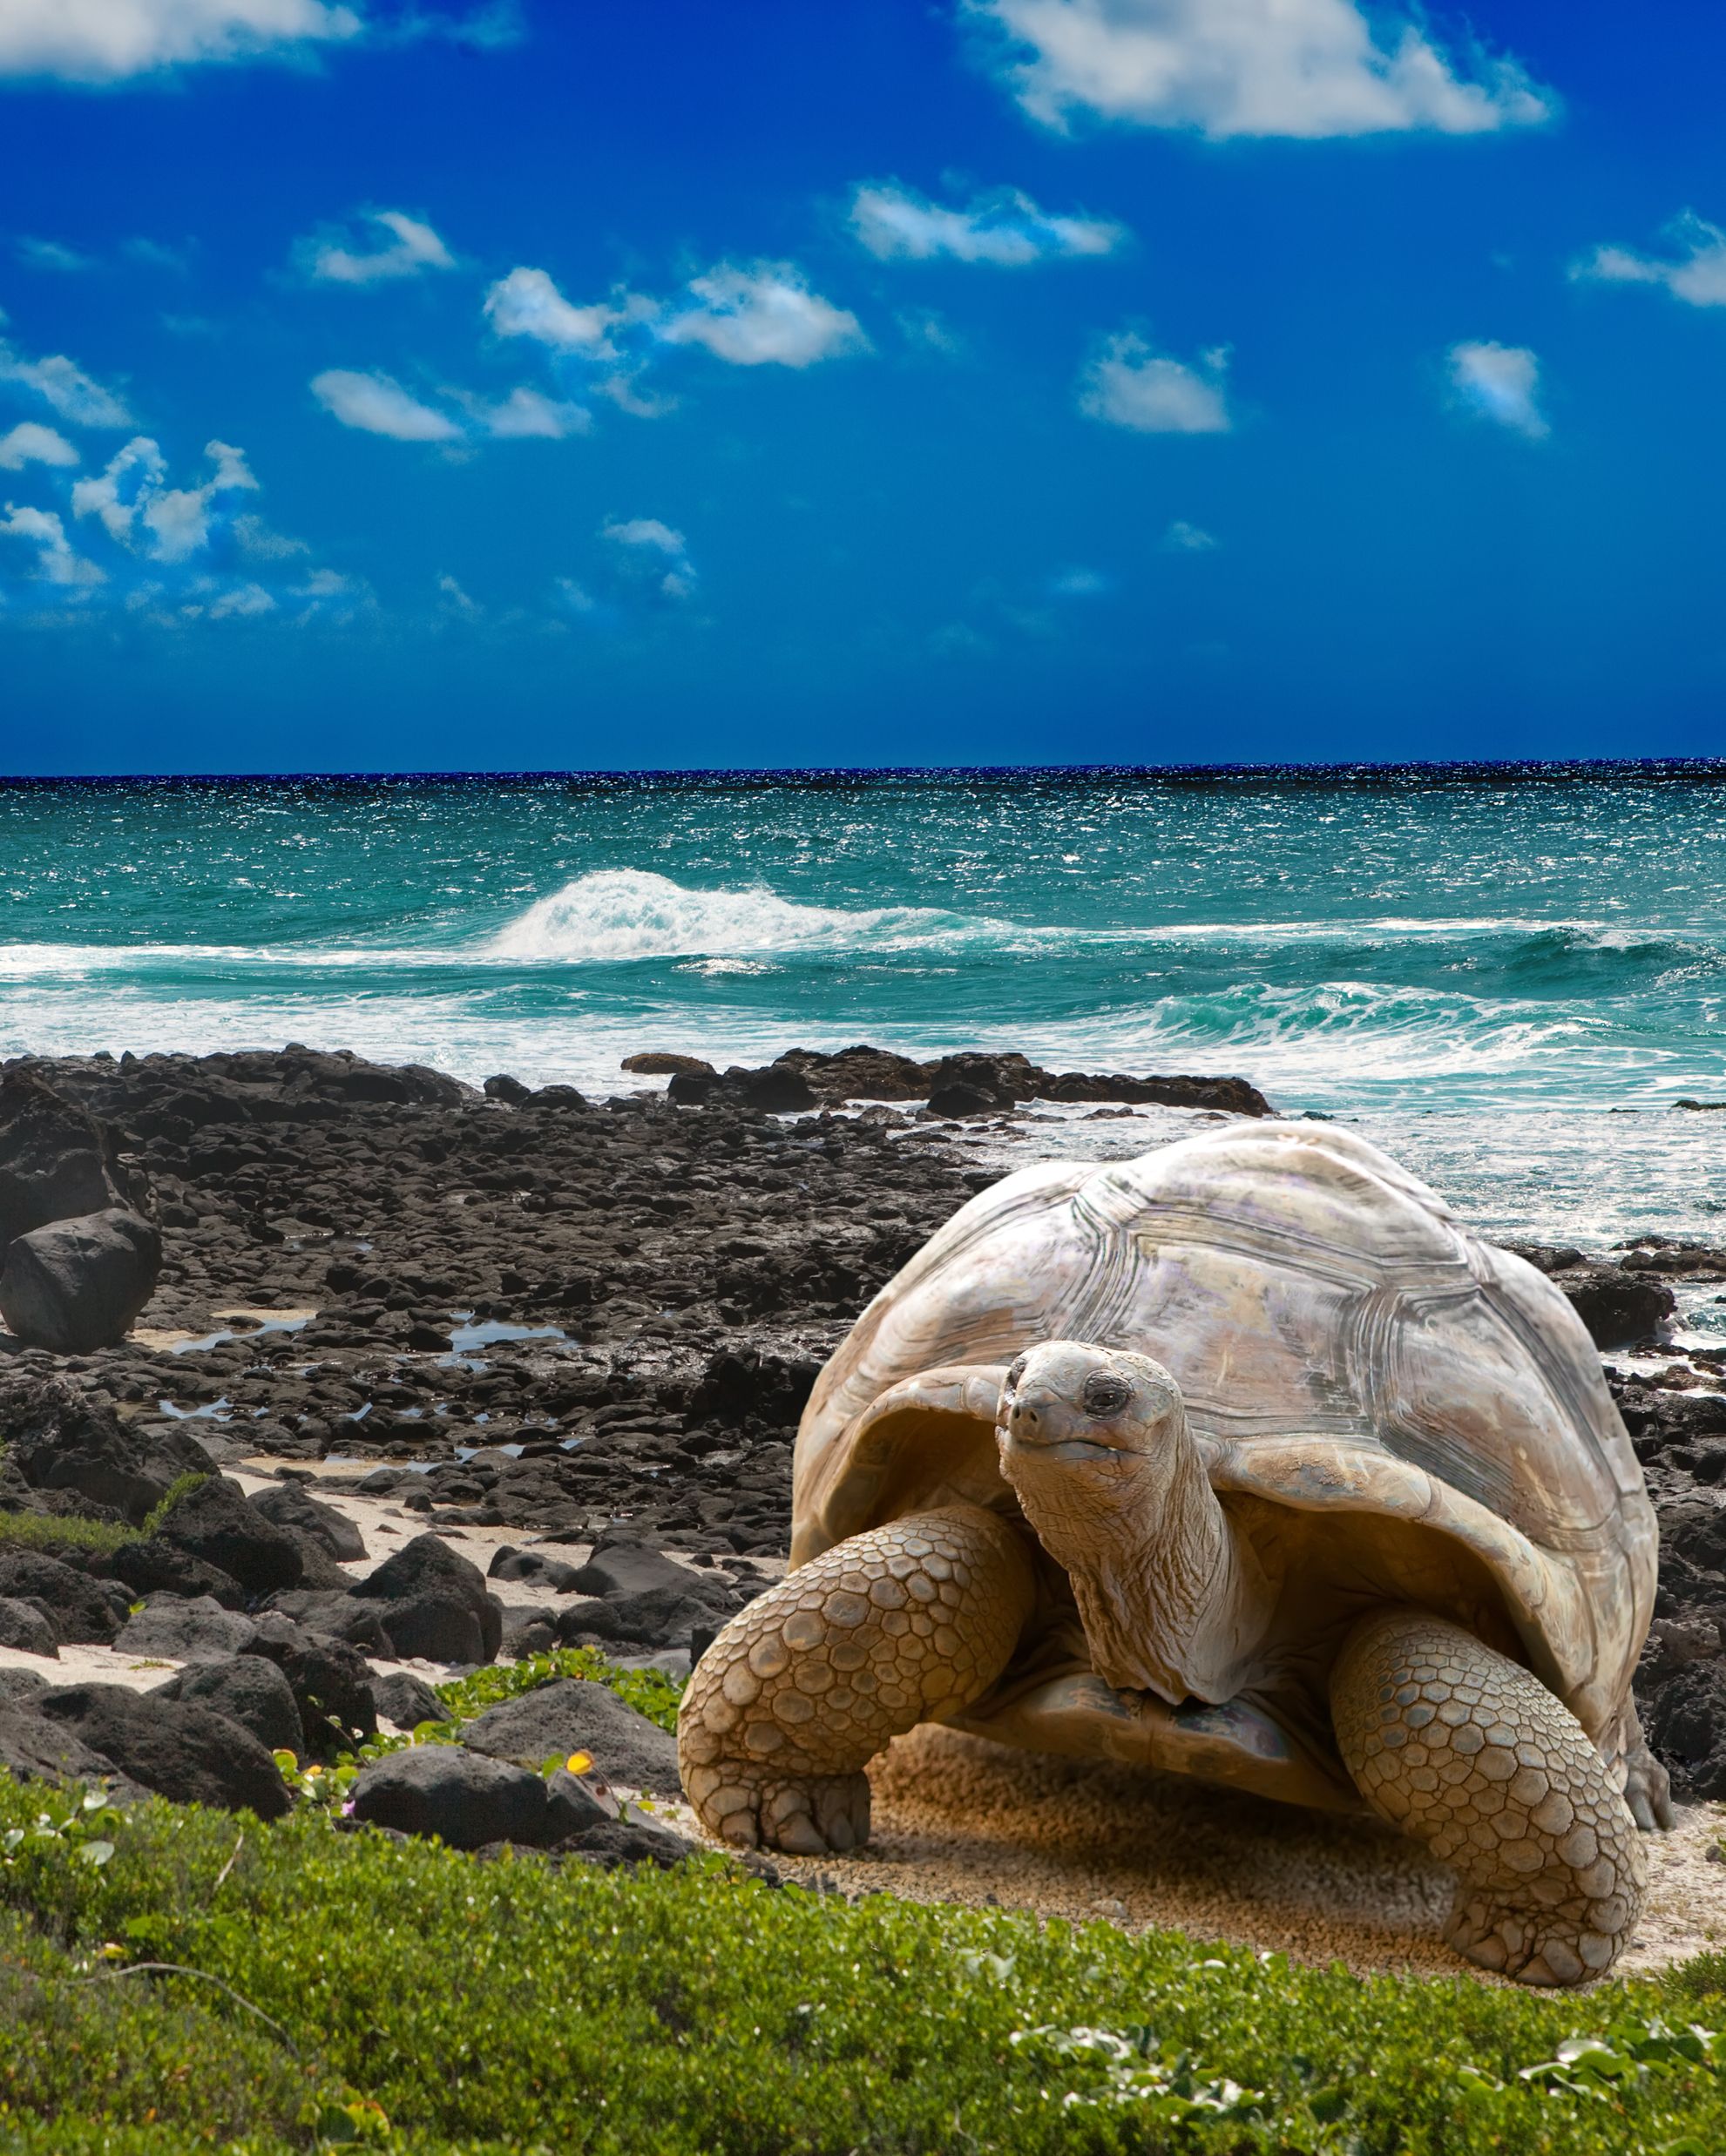 large turtle at sea edge on background of tropical landscape